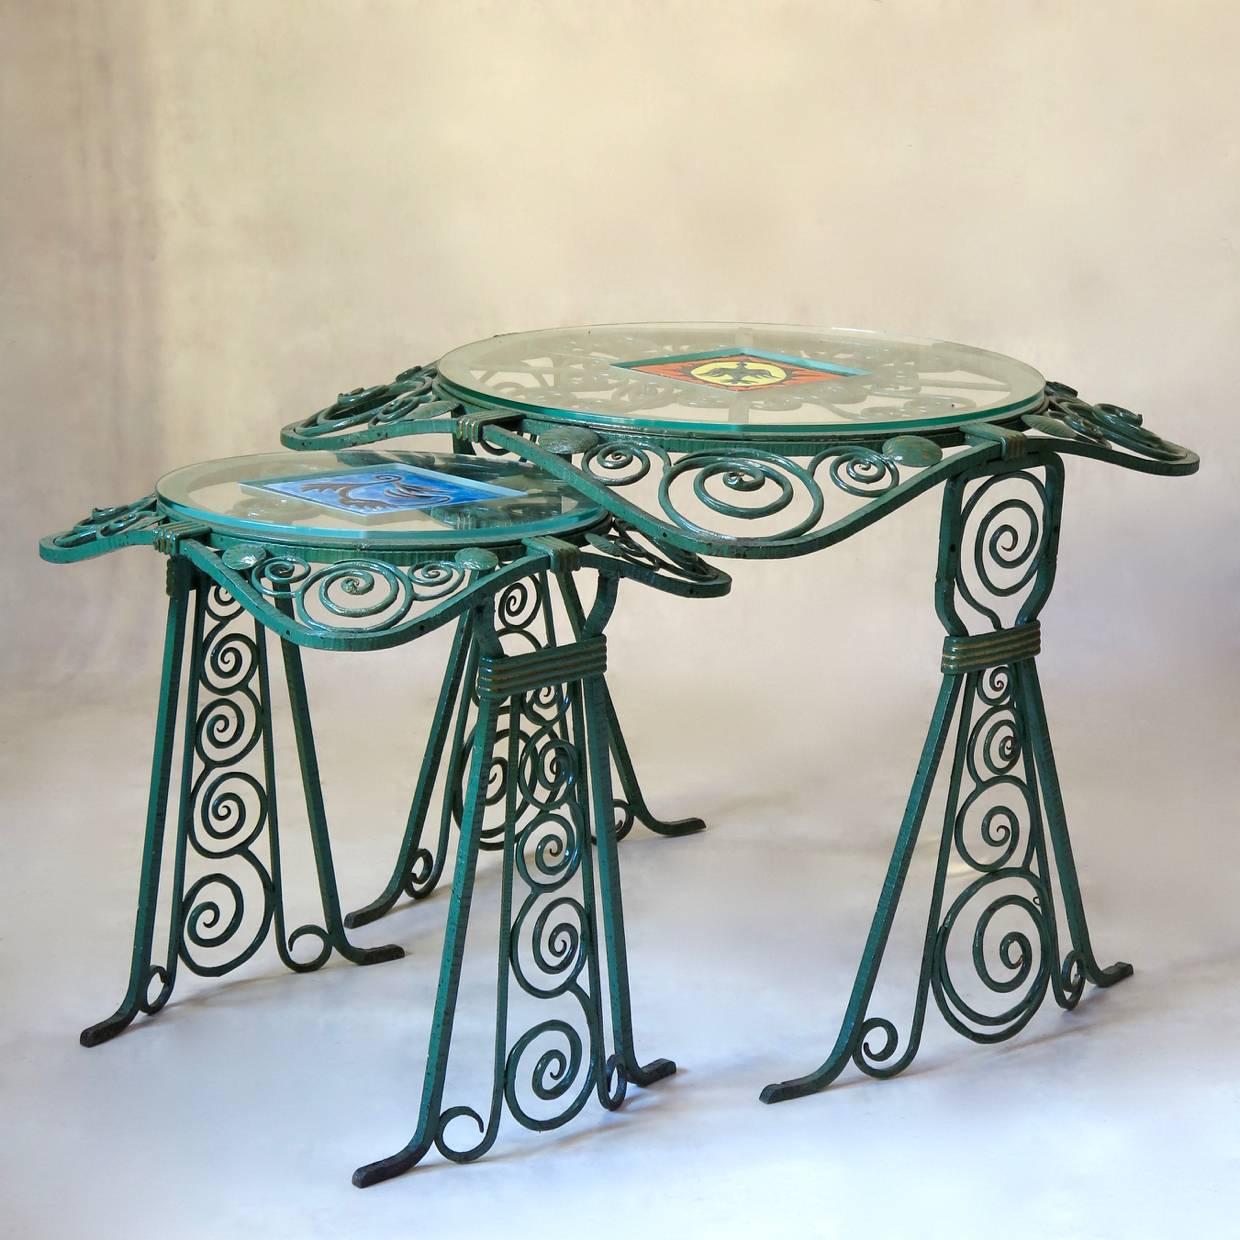 Set comprised of two side tables (one small, one large) and two tall columns, which could be adapted as floor lamps, or used as are.

Fashioned out of hammered wrought iron, painted sea green, with gold highlights. 

The tables have sloping